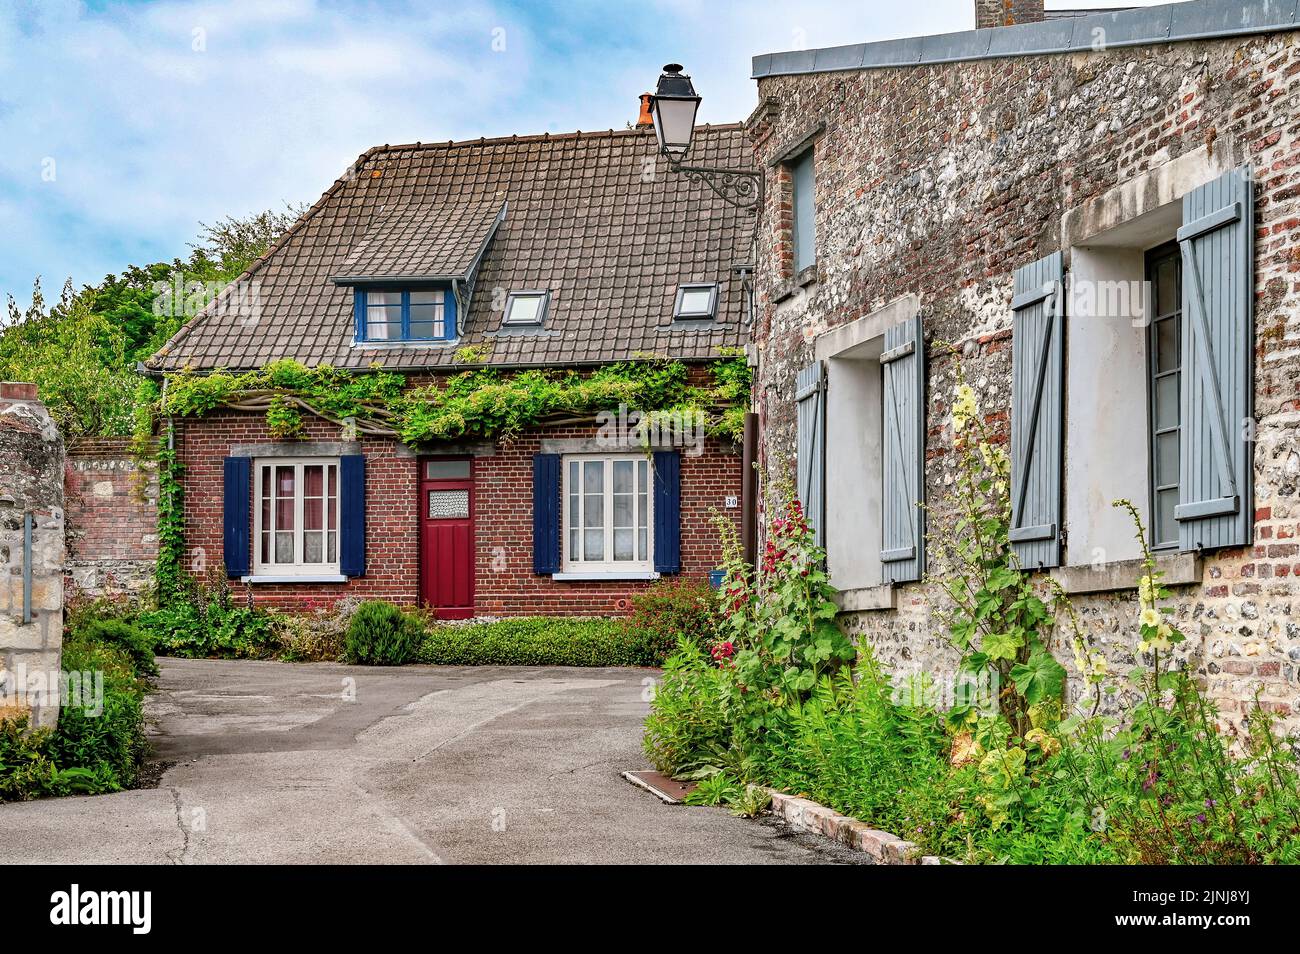 Saint-Valery-sur Somme is ranked as one of France's most beautiful ...